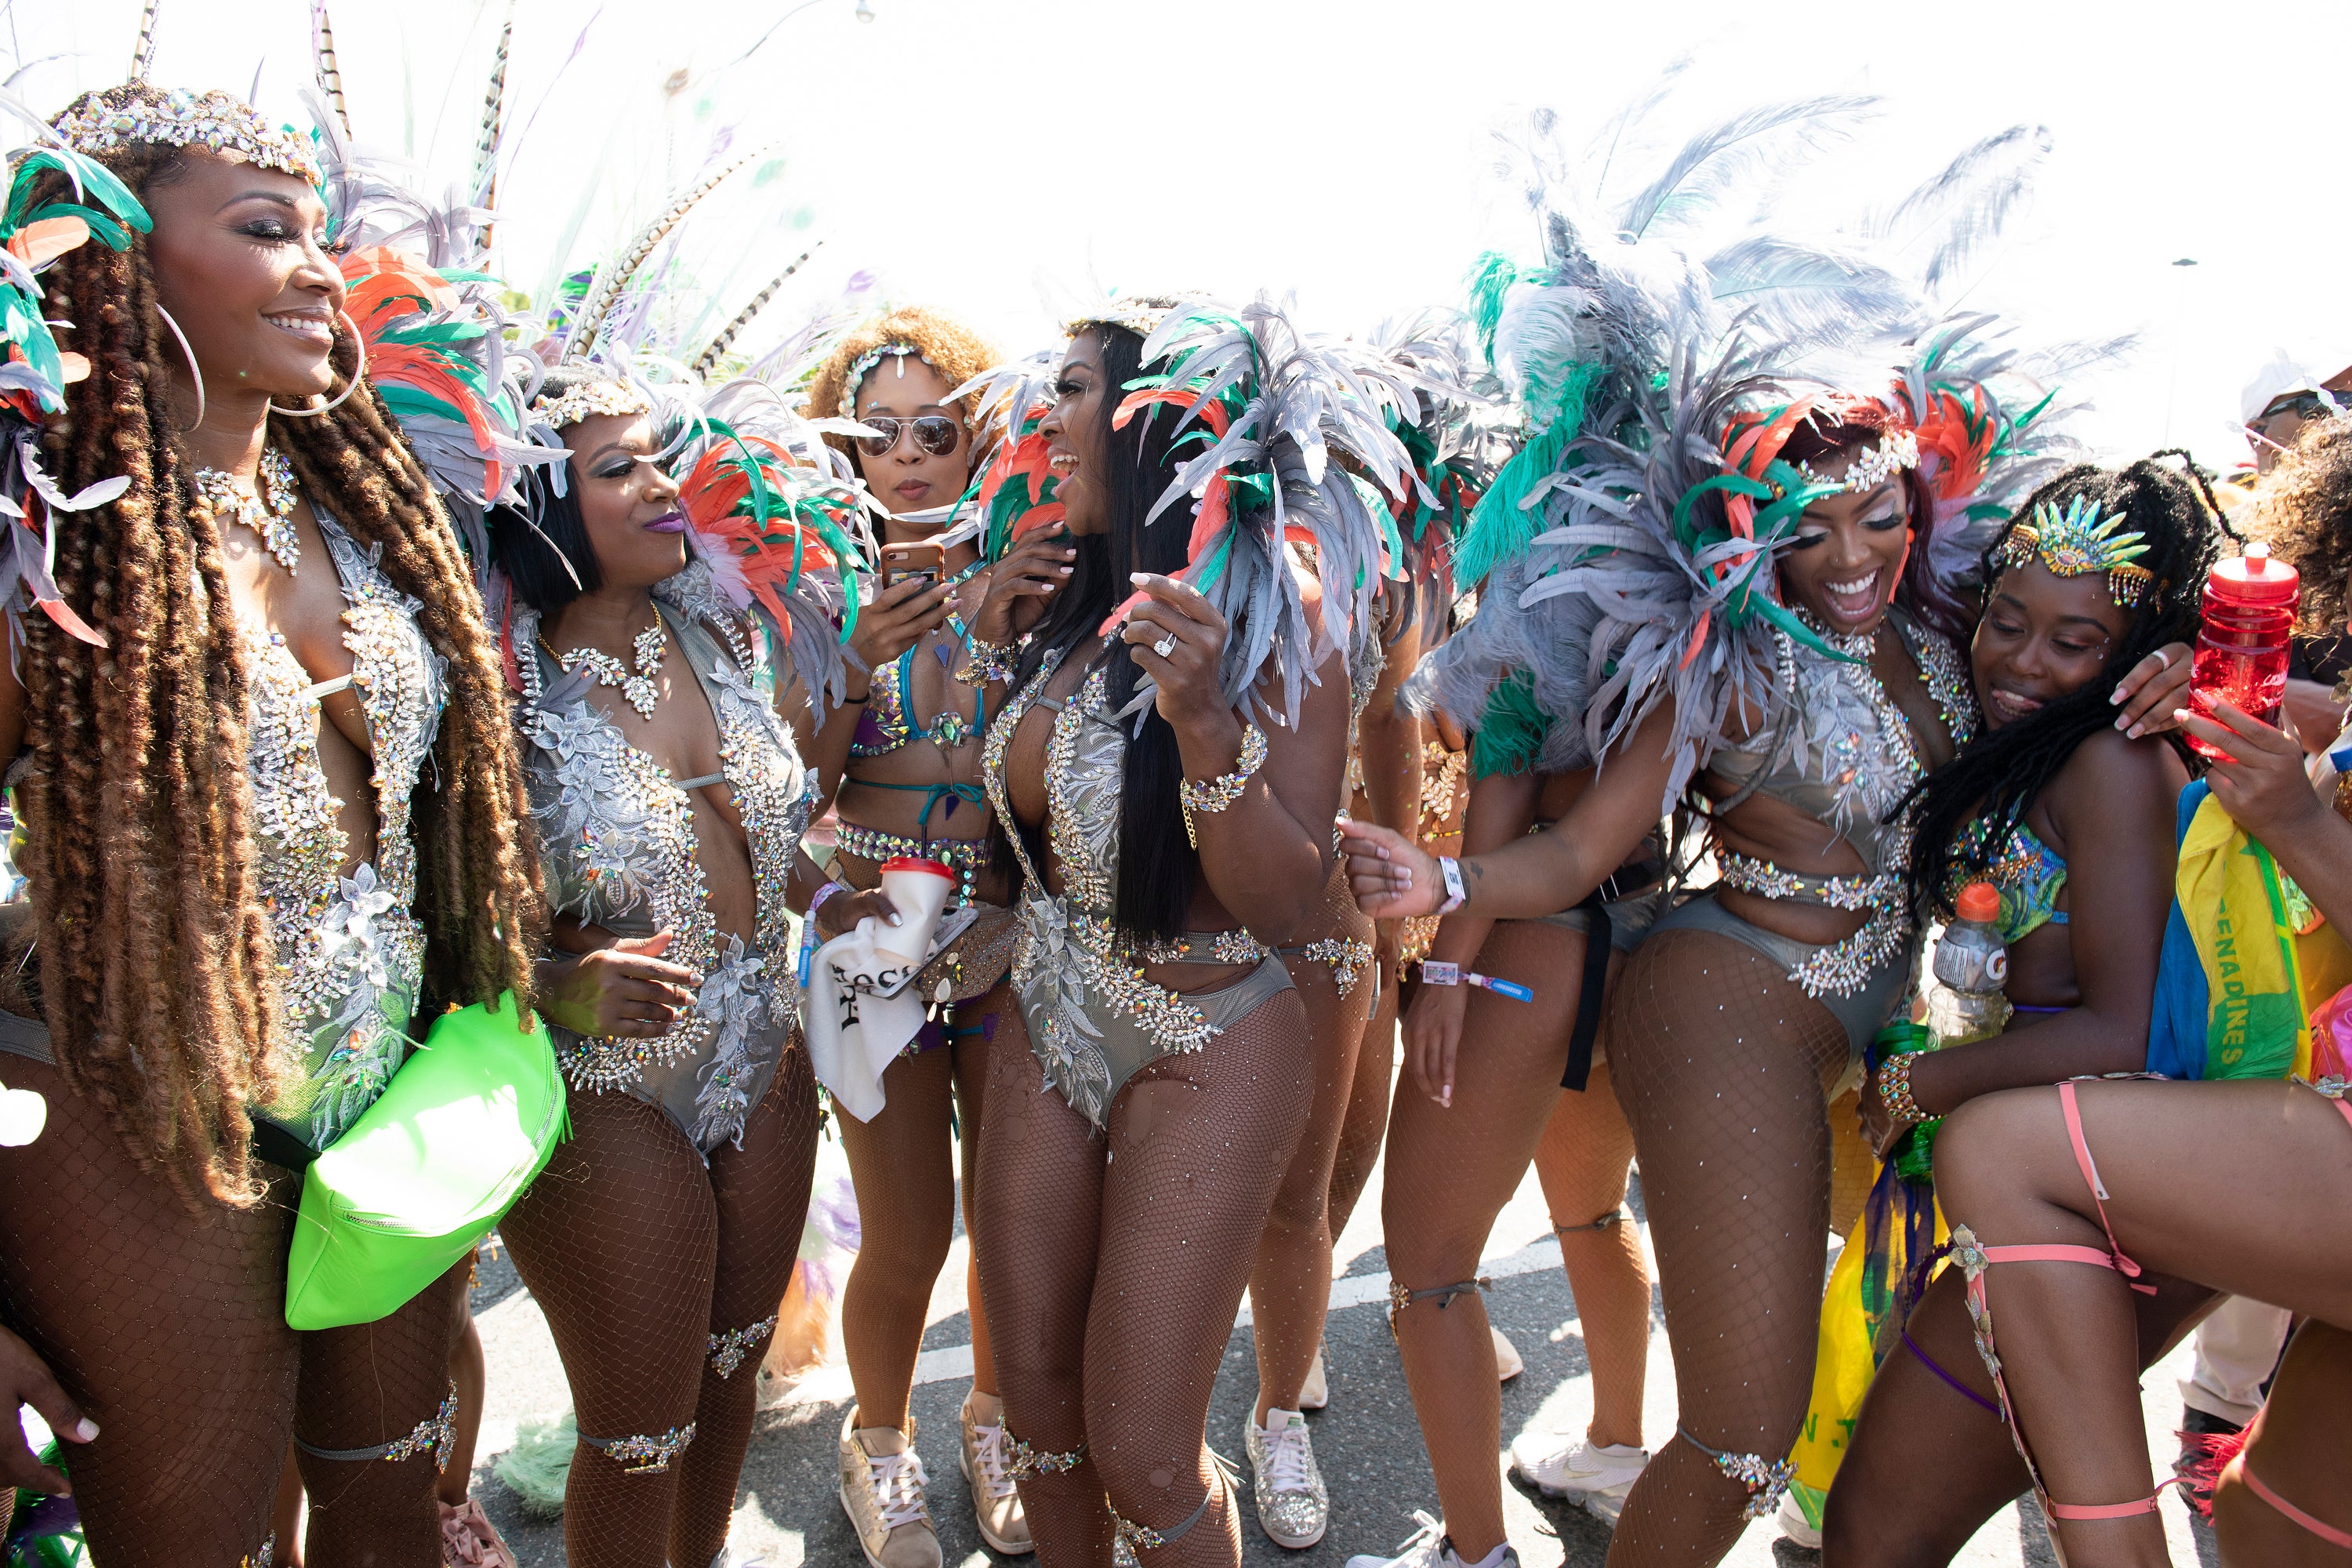 6 Never-Before-Seen Photos Of 'The Real Housewives of Atlanta' At Toronto Carnival